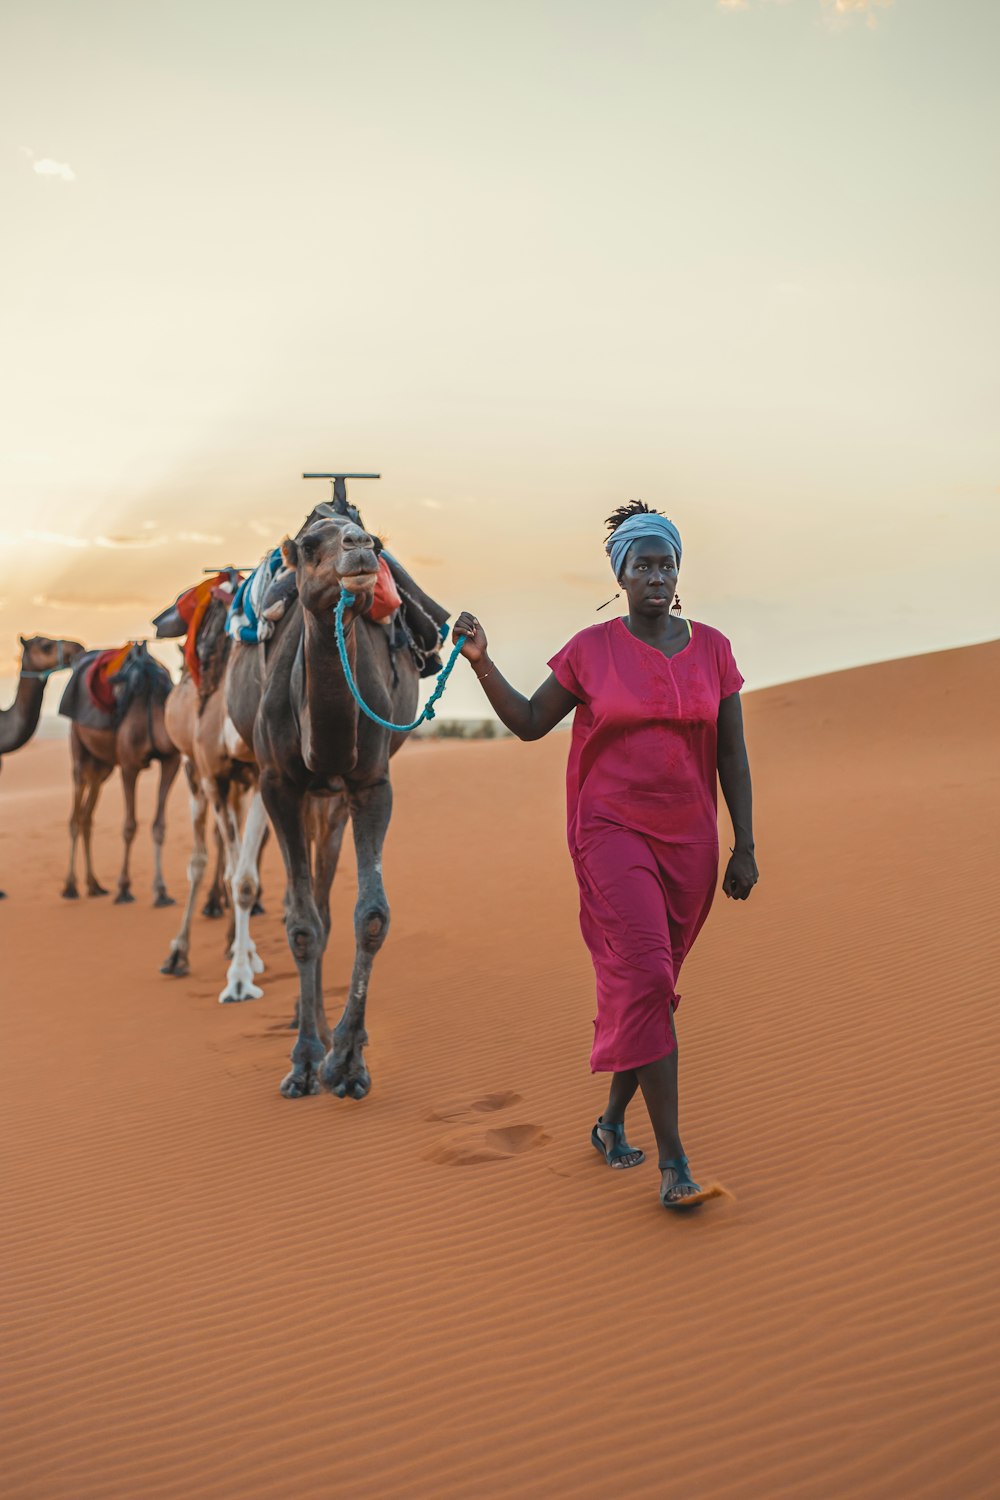 a man walking with camels